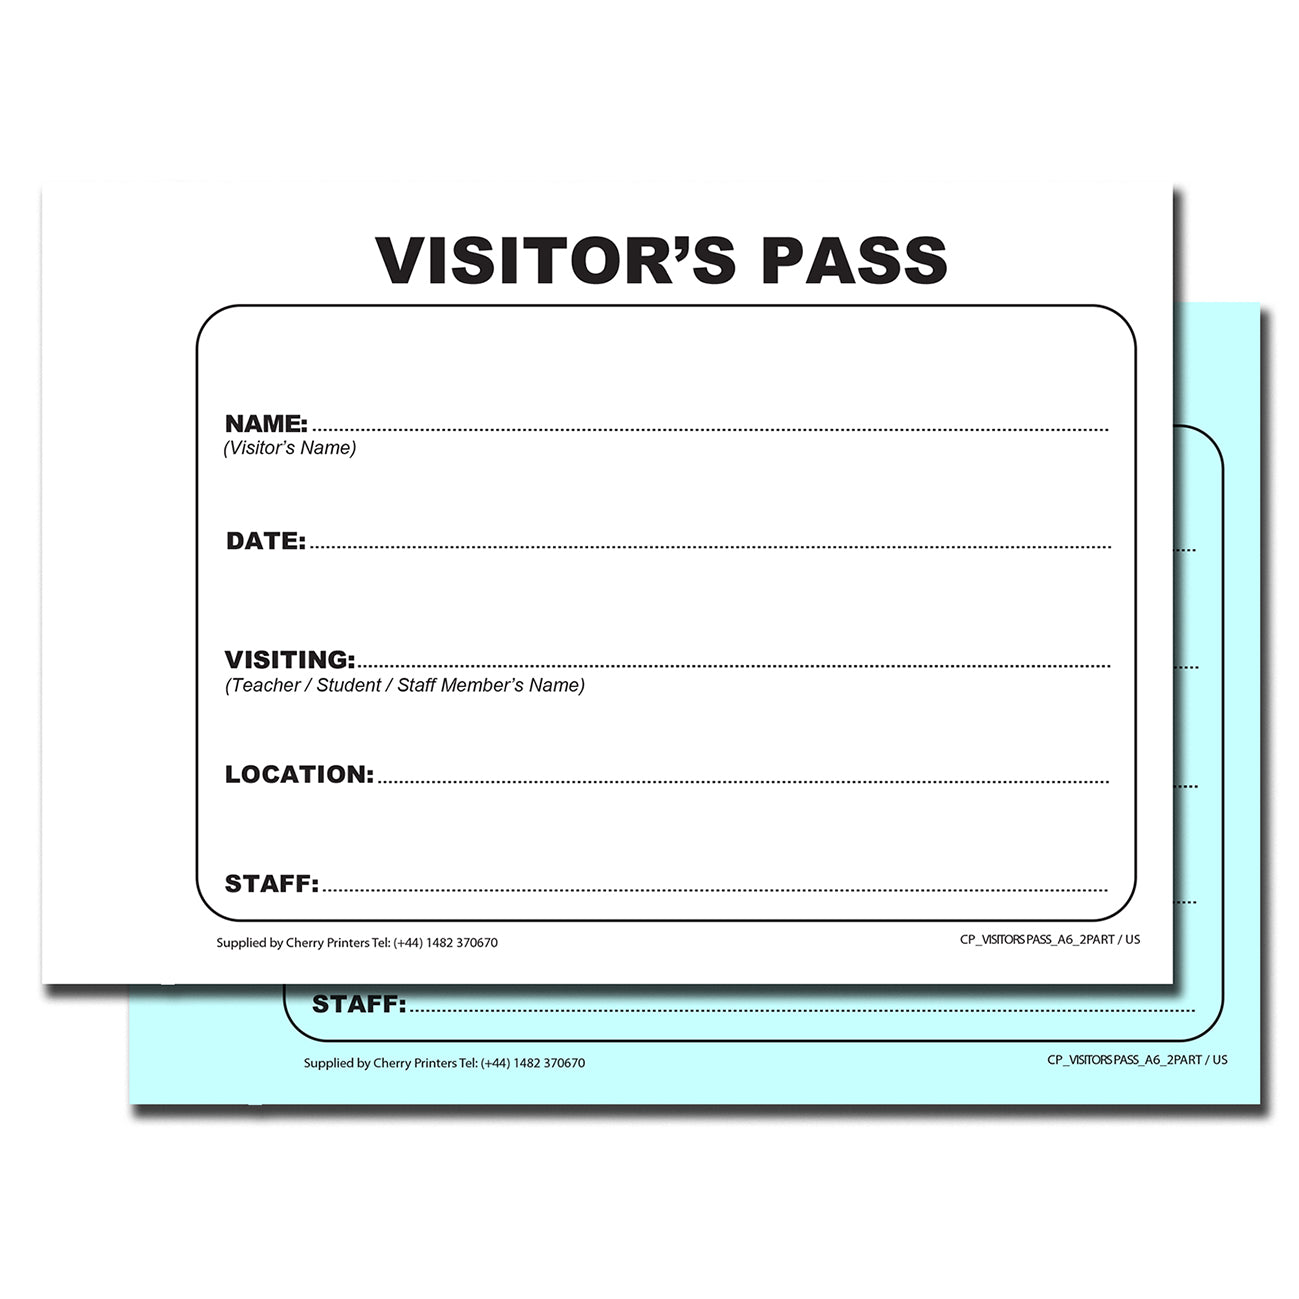 Visitor's Pass | Duplicate Book | 2 part | Carbonless | 50 Sets per book | A6 - 5.8" x 4.1" | BOX OF 80 BOOKS